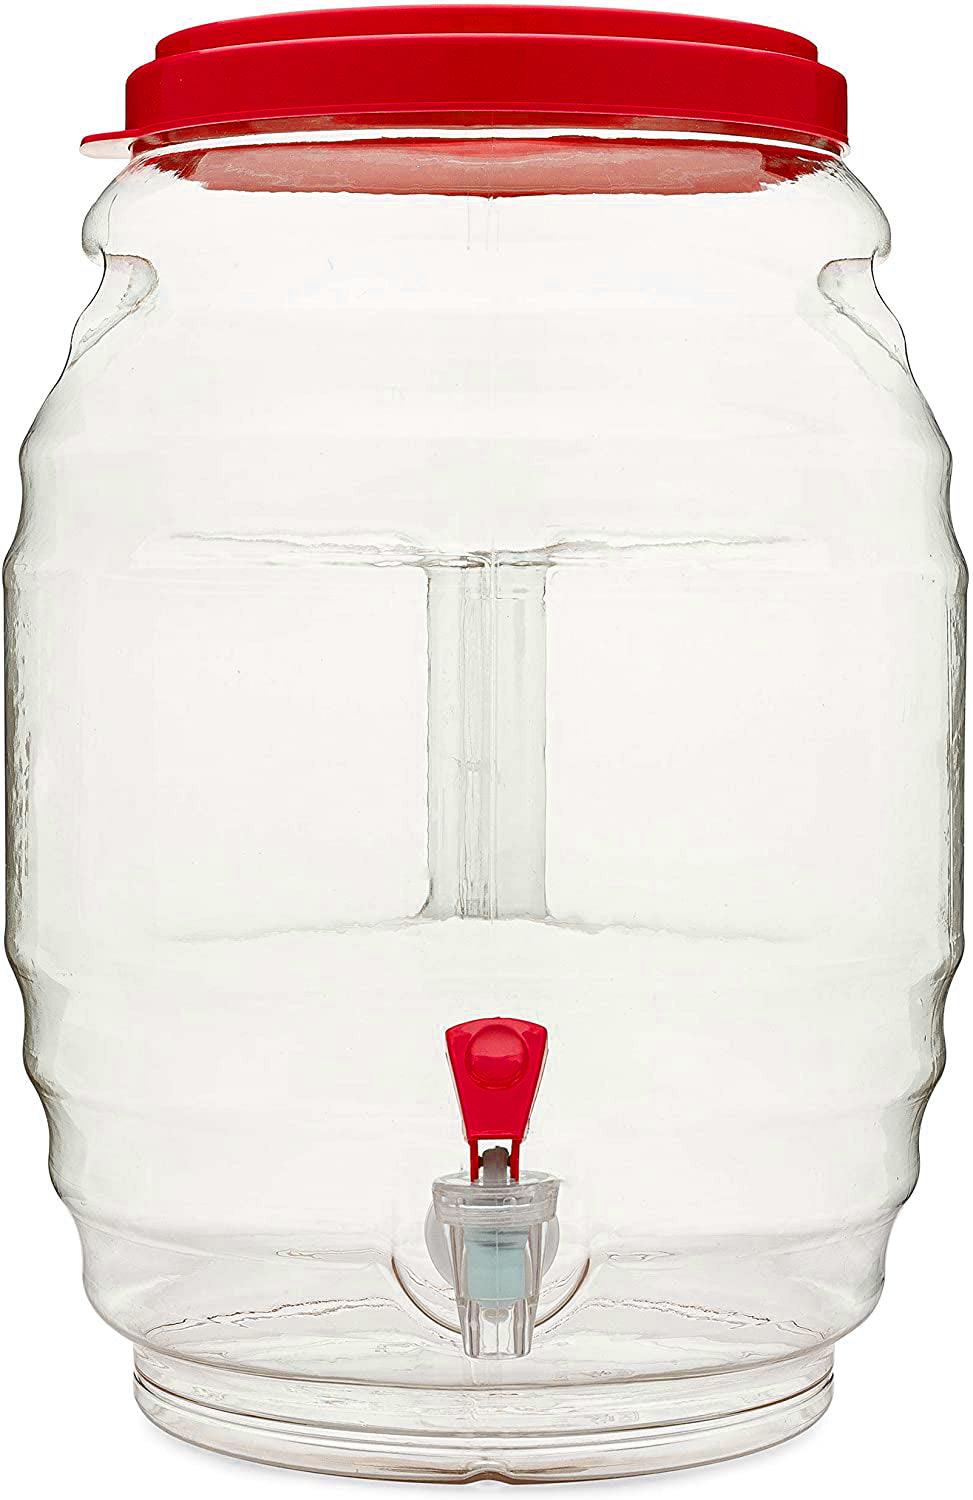 5 GAL Red Jug Water Dispenser With Lid & Spout